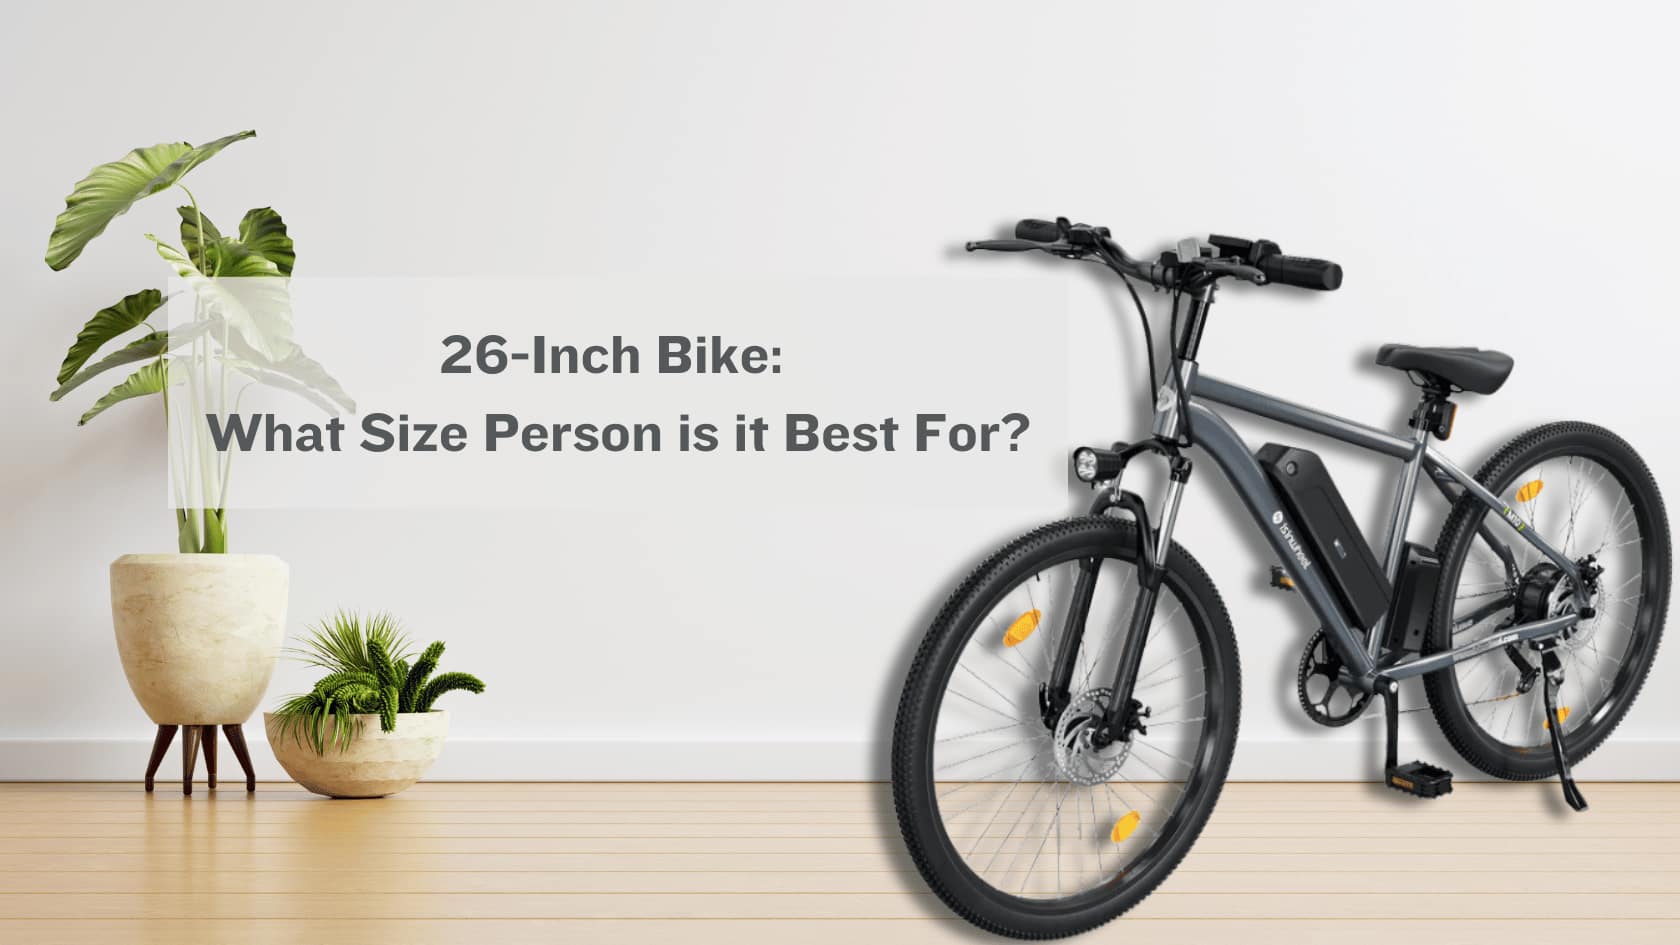 26 Inch Bike: What Size Person is it Best For?